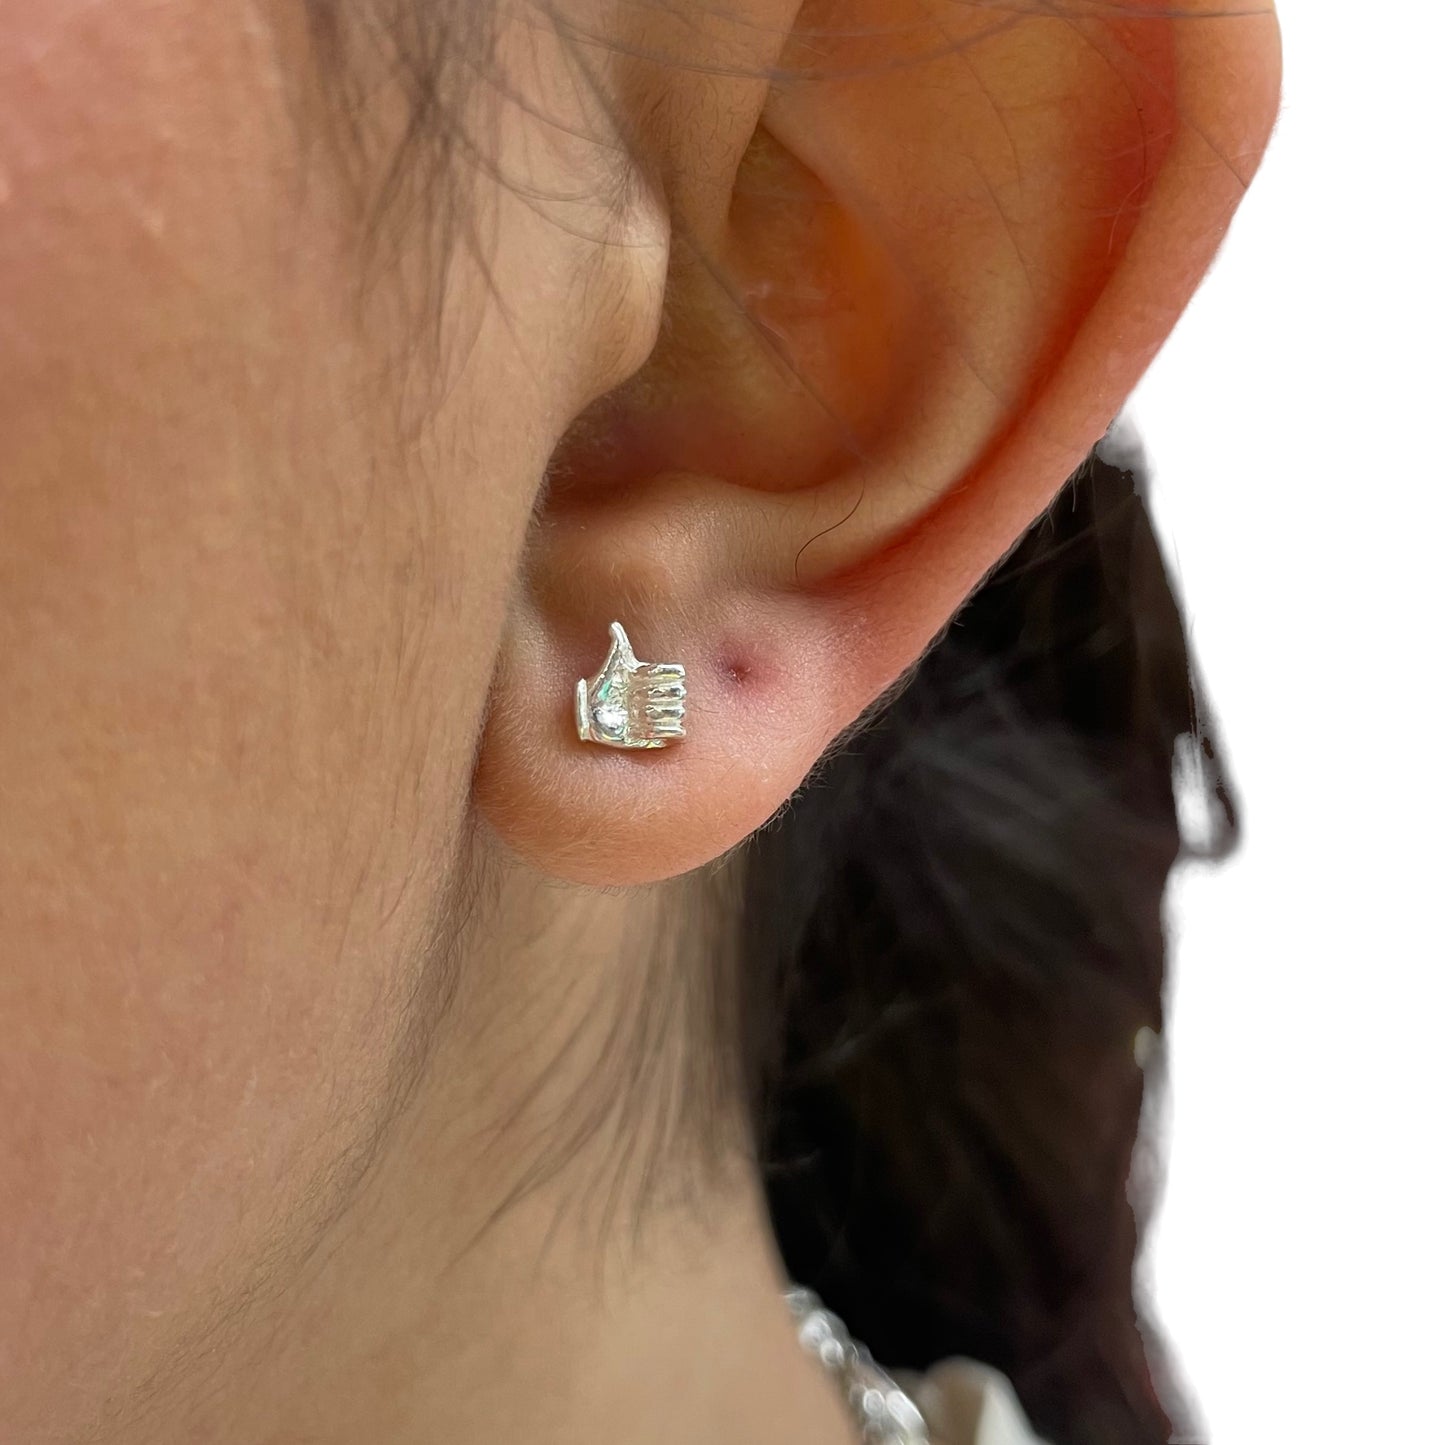 Stud earring with thumbs up &amp; down